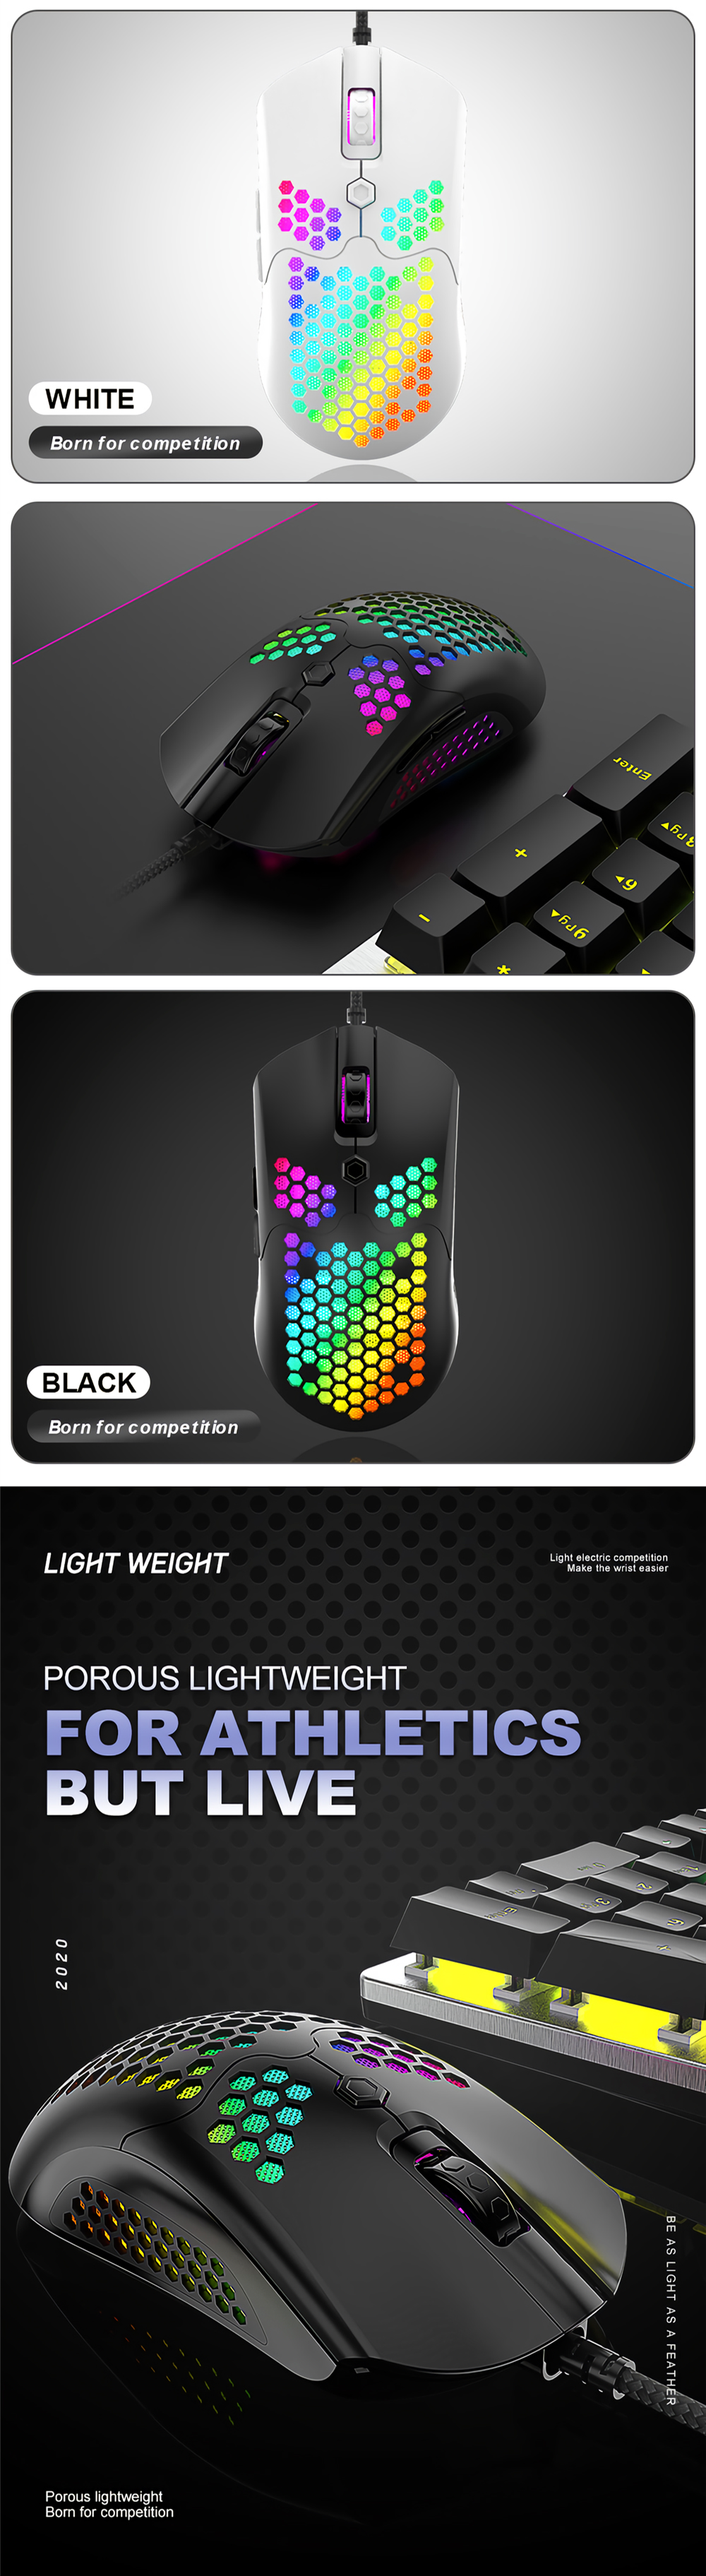 Free-wolf M5 Wired Game Mouse Breathing RGB Colorful Hollow Honeycomb Shape 12000DPI Gaming Mouse USB Wired Gamer Mice for Desktop Computer Laptop PC 5